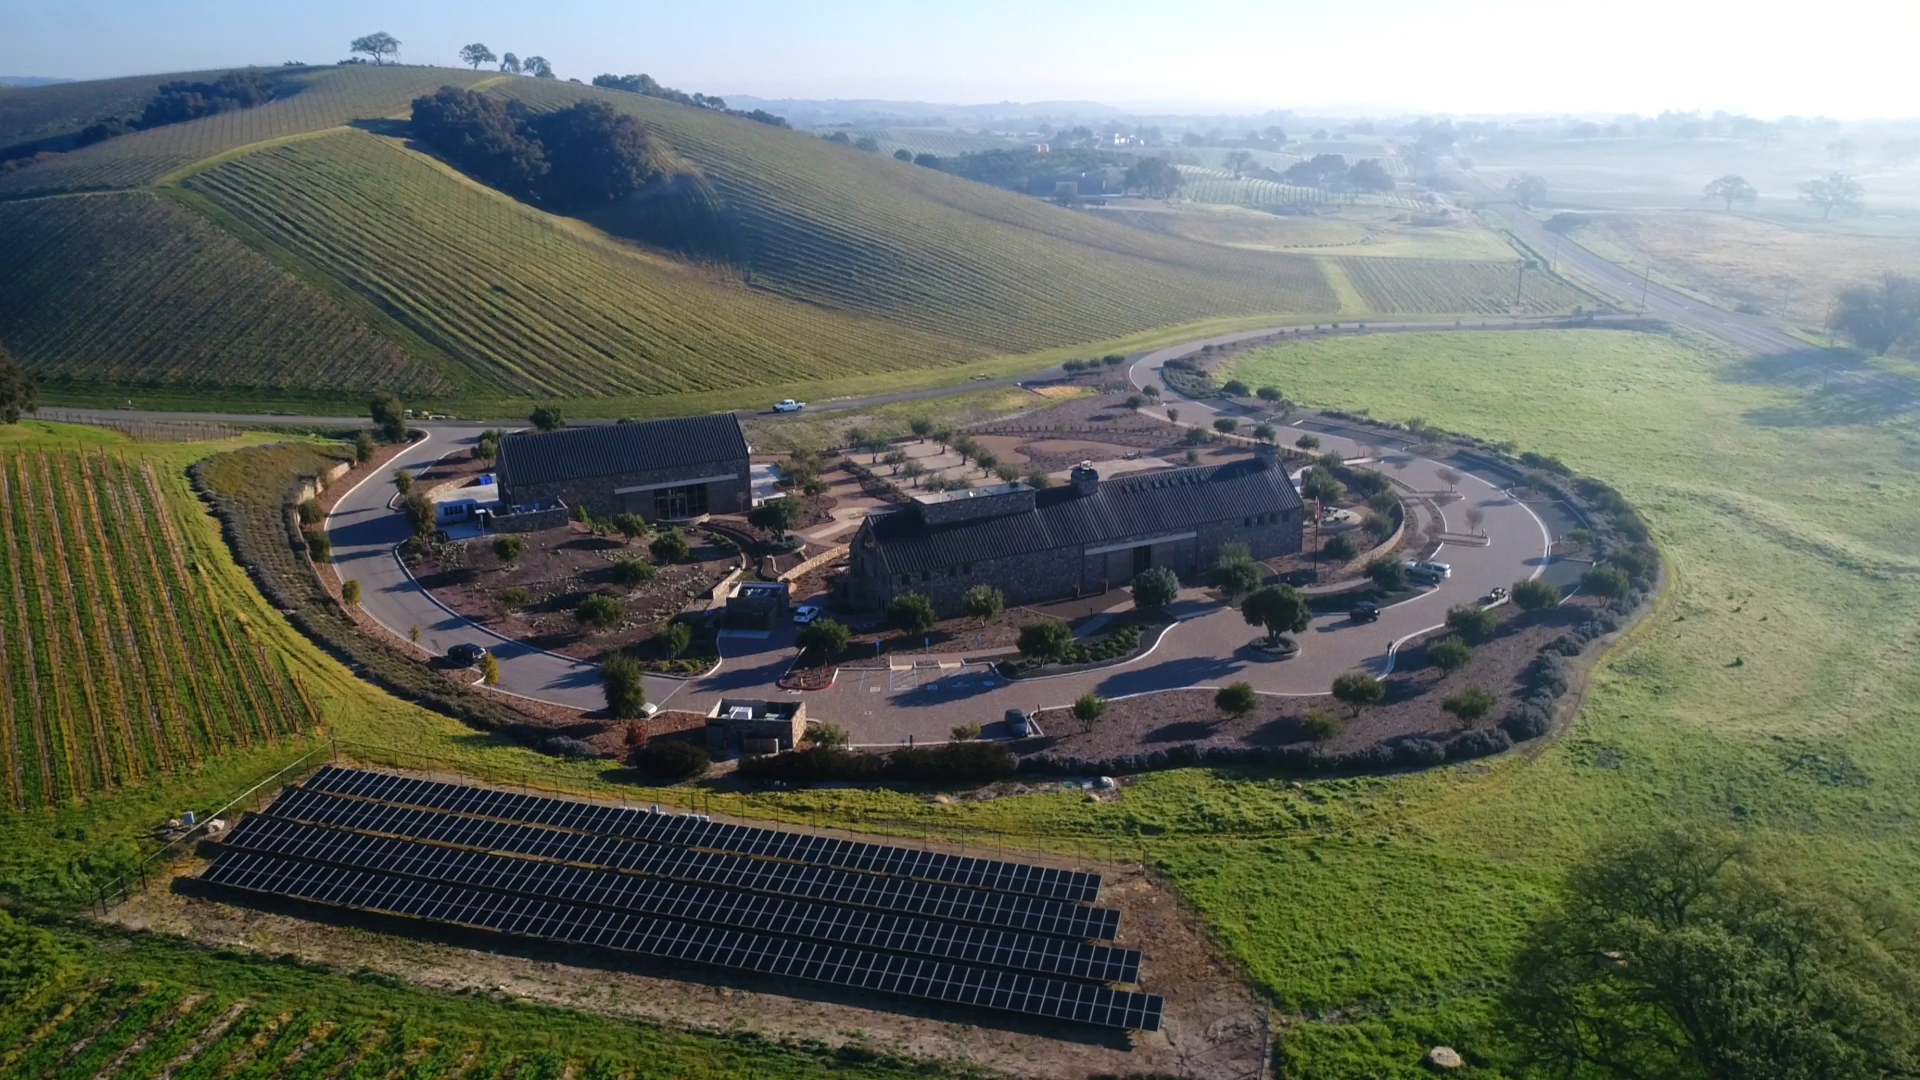 Aerial view of our tasting room, craft winery, solar panels and vineyards